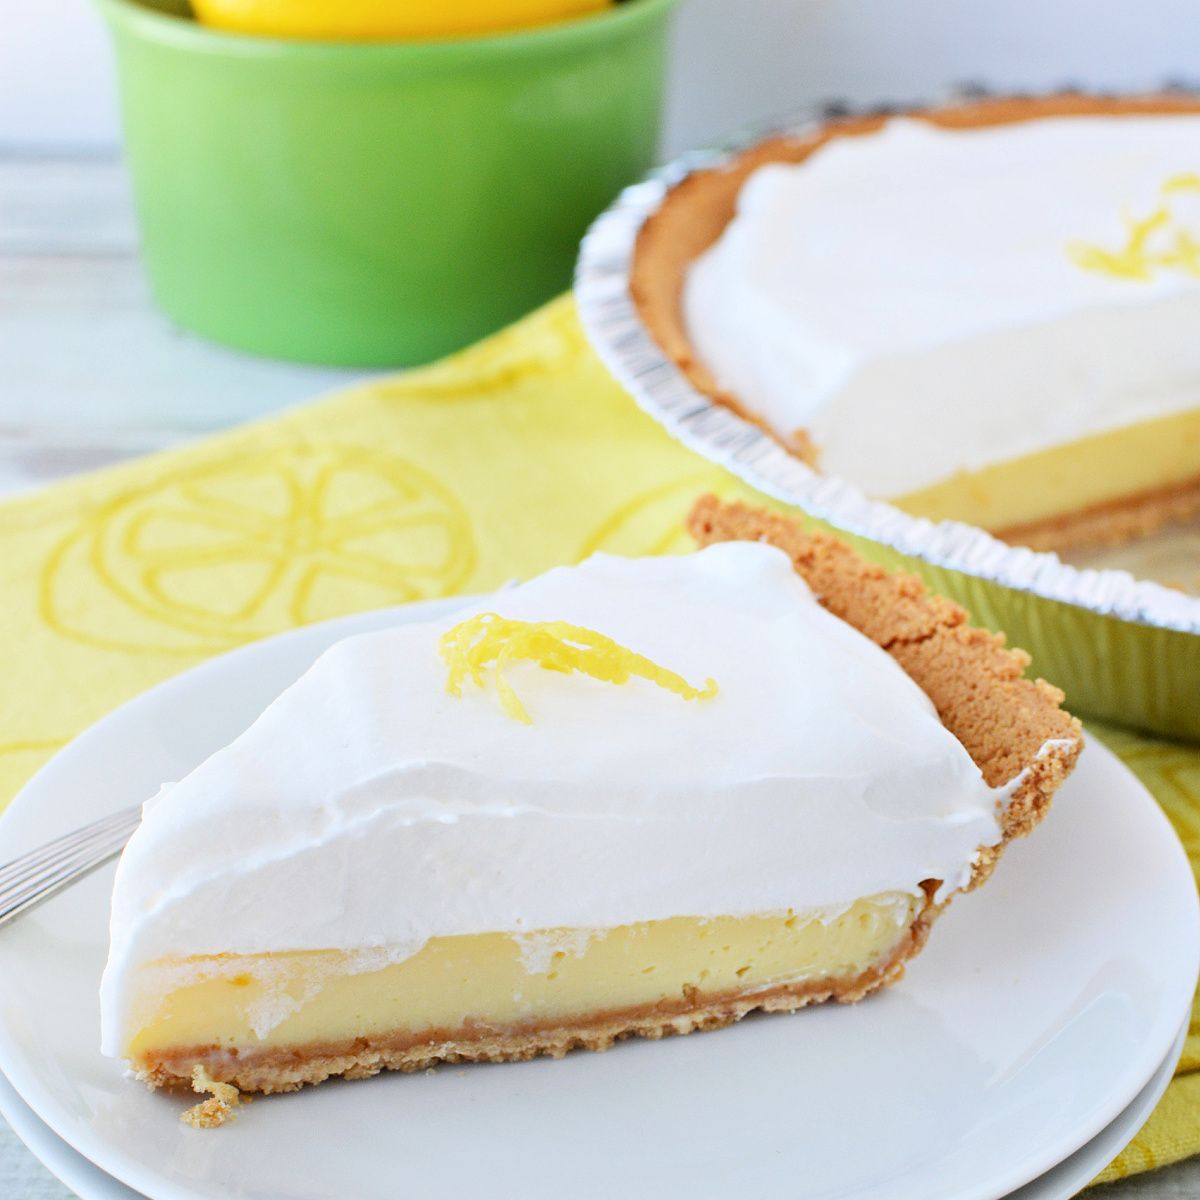 Here is a super simple and tasty Lemon Pie with Condensed Milk Recipe. I swear anyone can make this! It has very few ingredients and you use a pre-made crust so it's even easier! Get the recipe here: therebelchick.com/easy-lemon-pie…